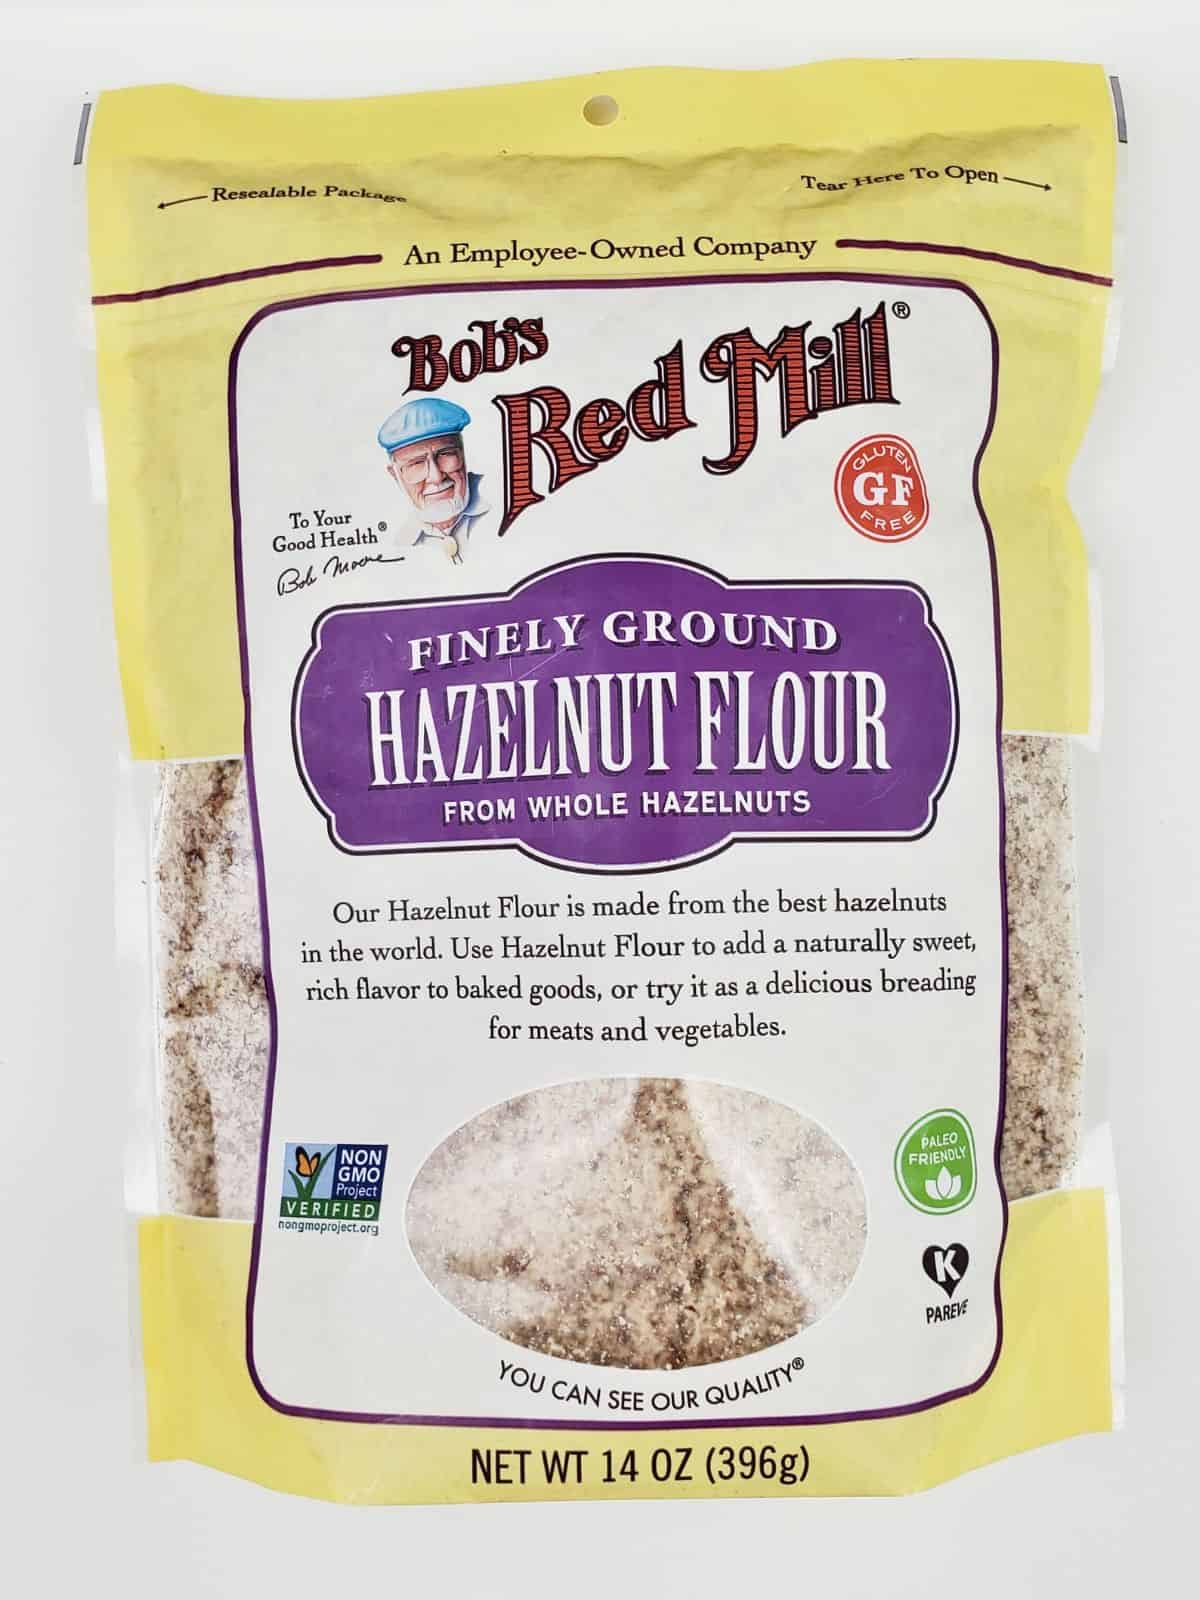 a pack of 14 oz. of hazelnut flour from Bob's Red Mill.